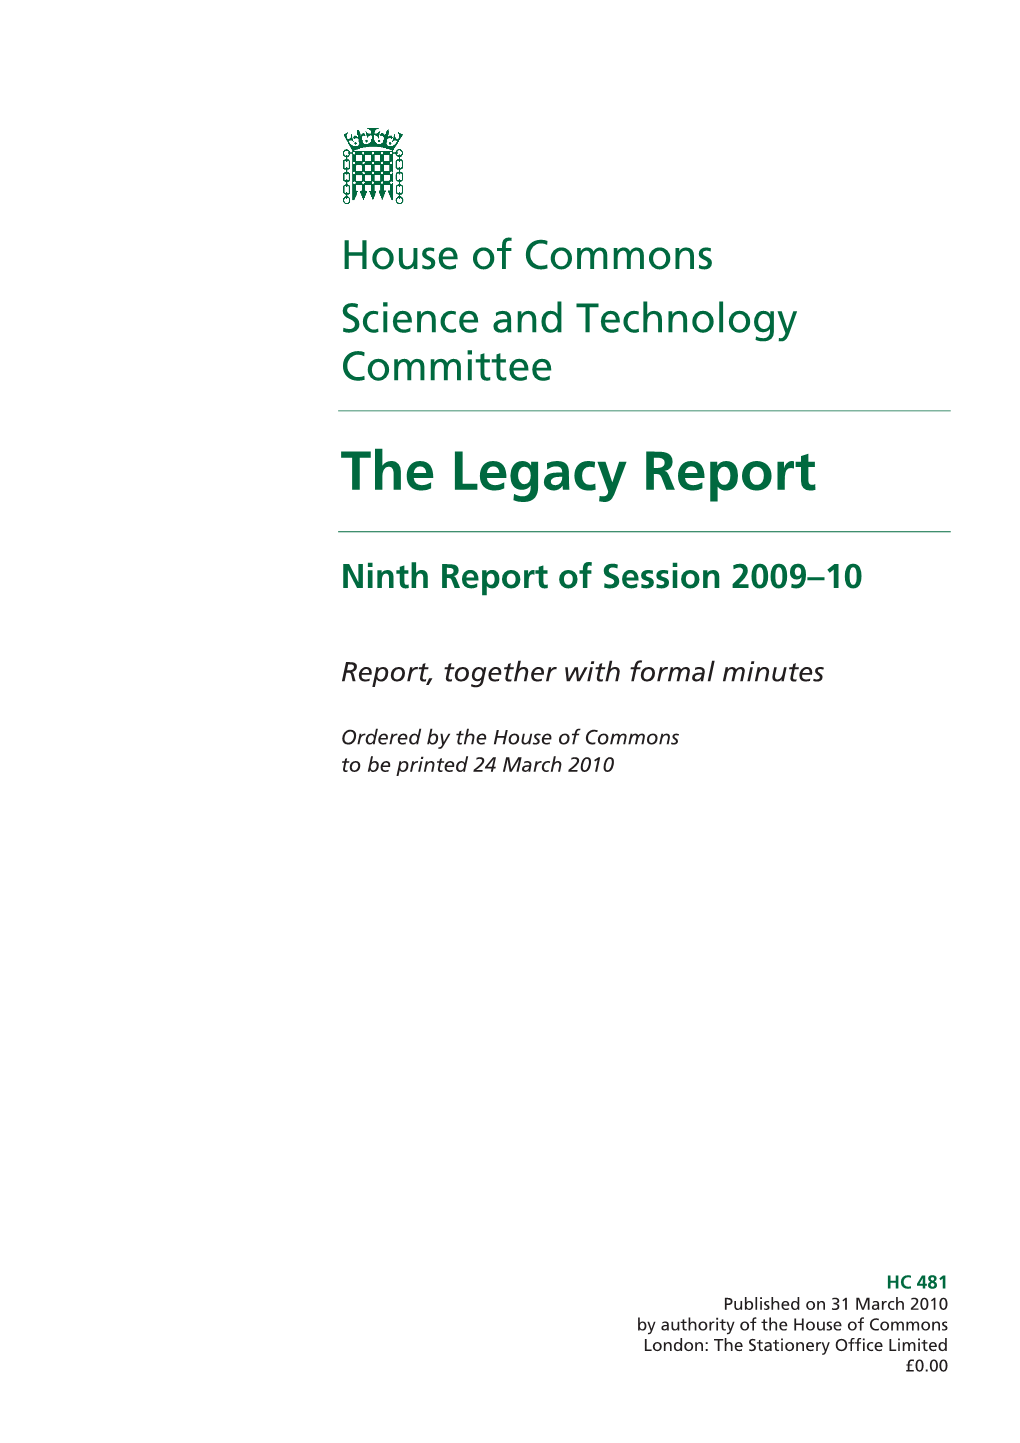 The Legacy Report